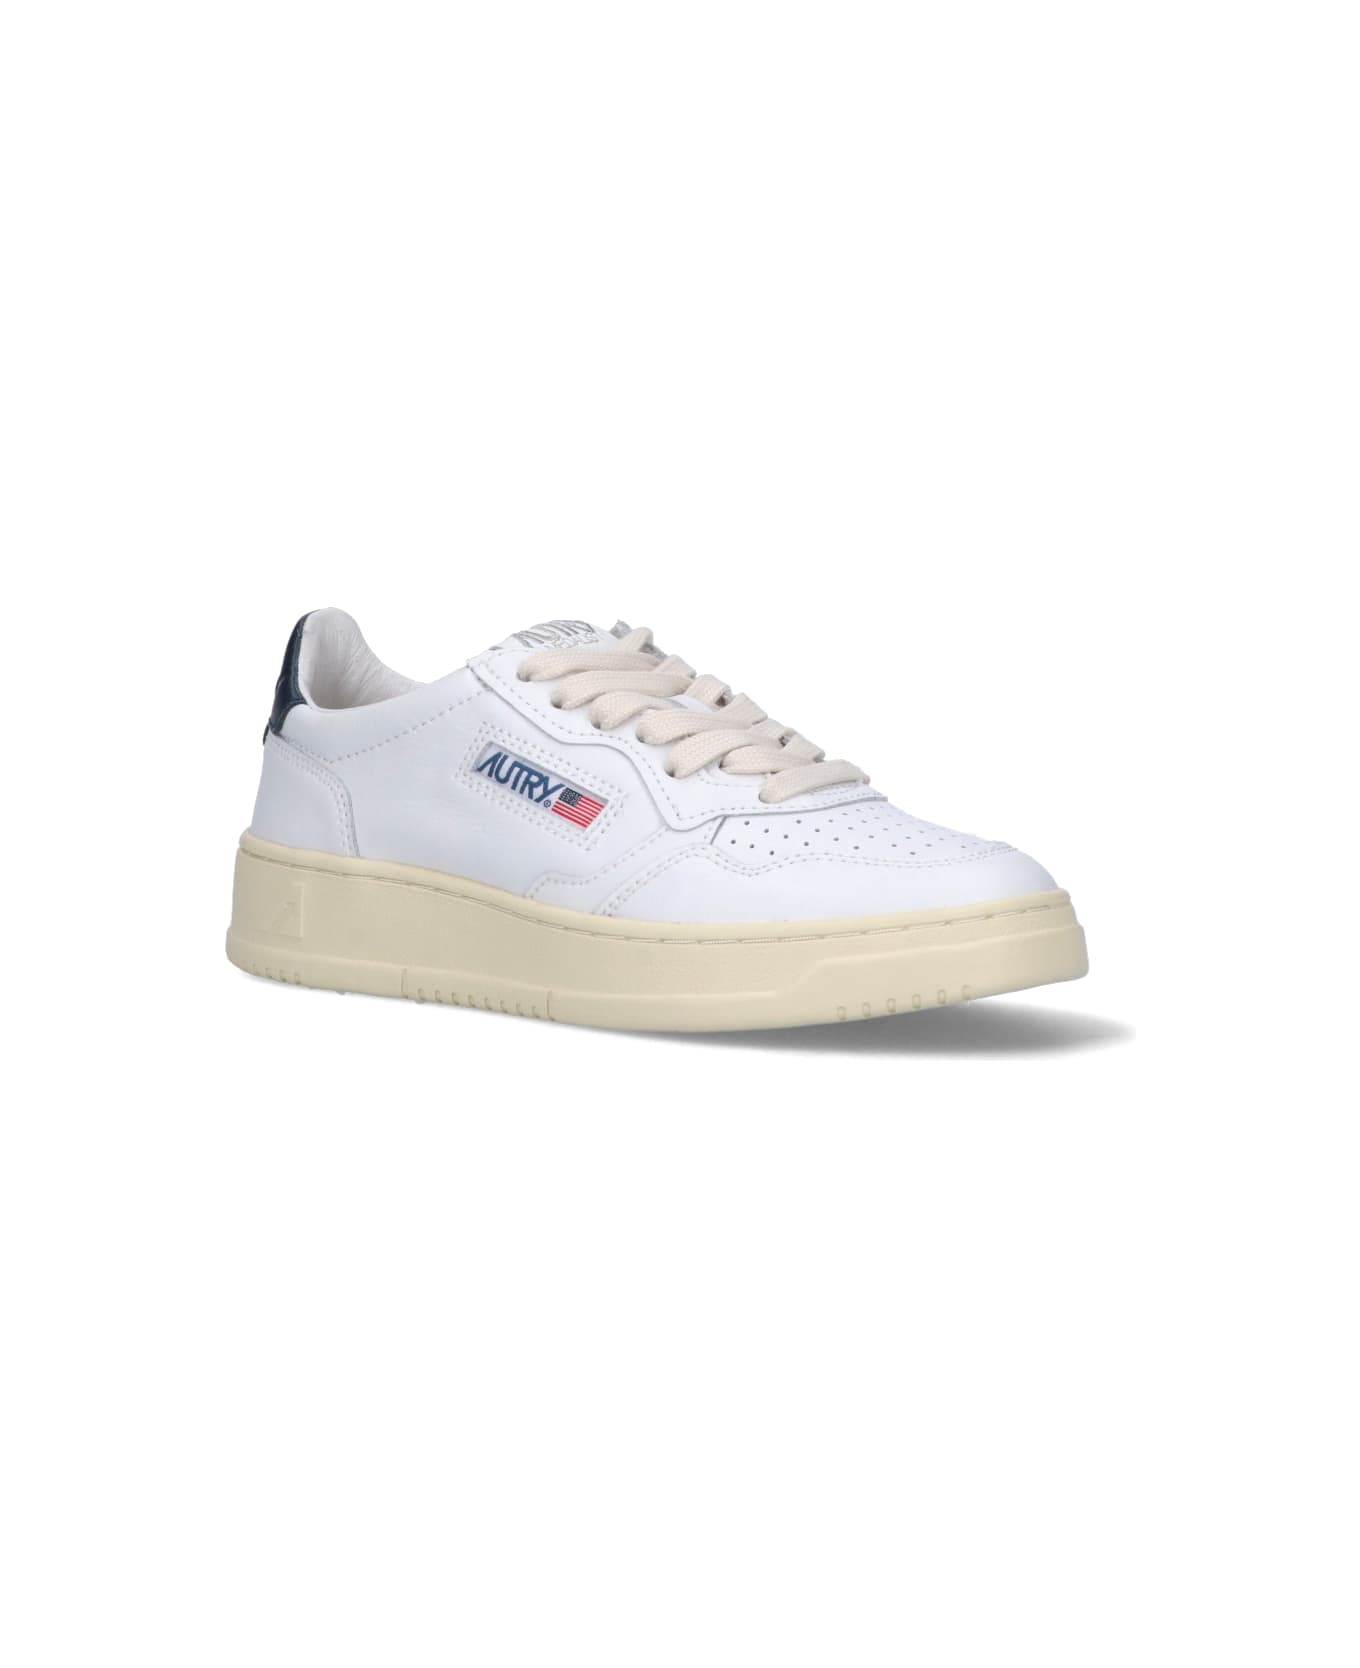 Autry 'medalist 01' Low Sneakers - Wht/space